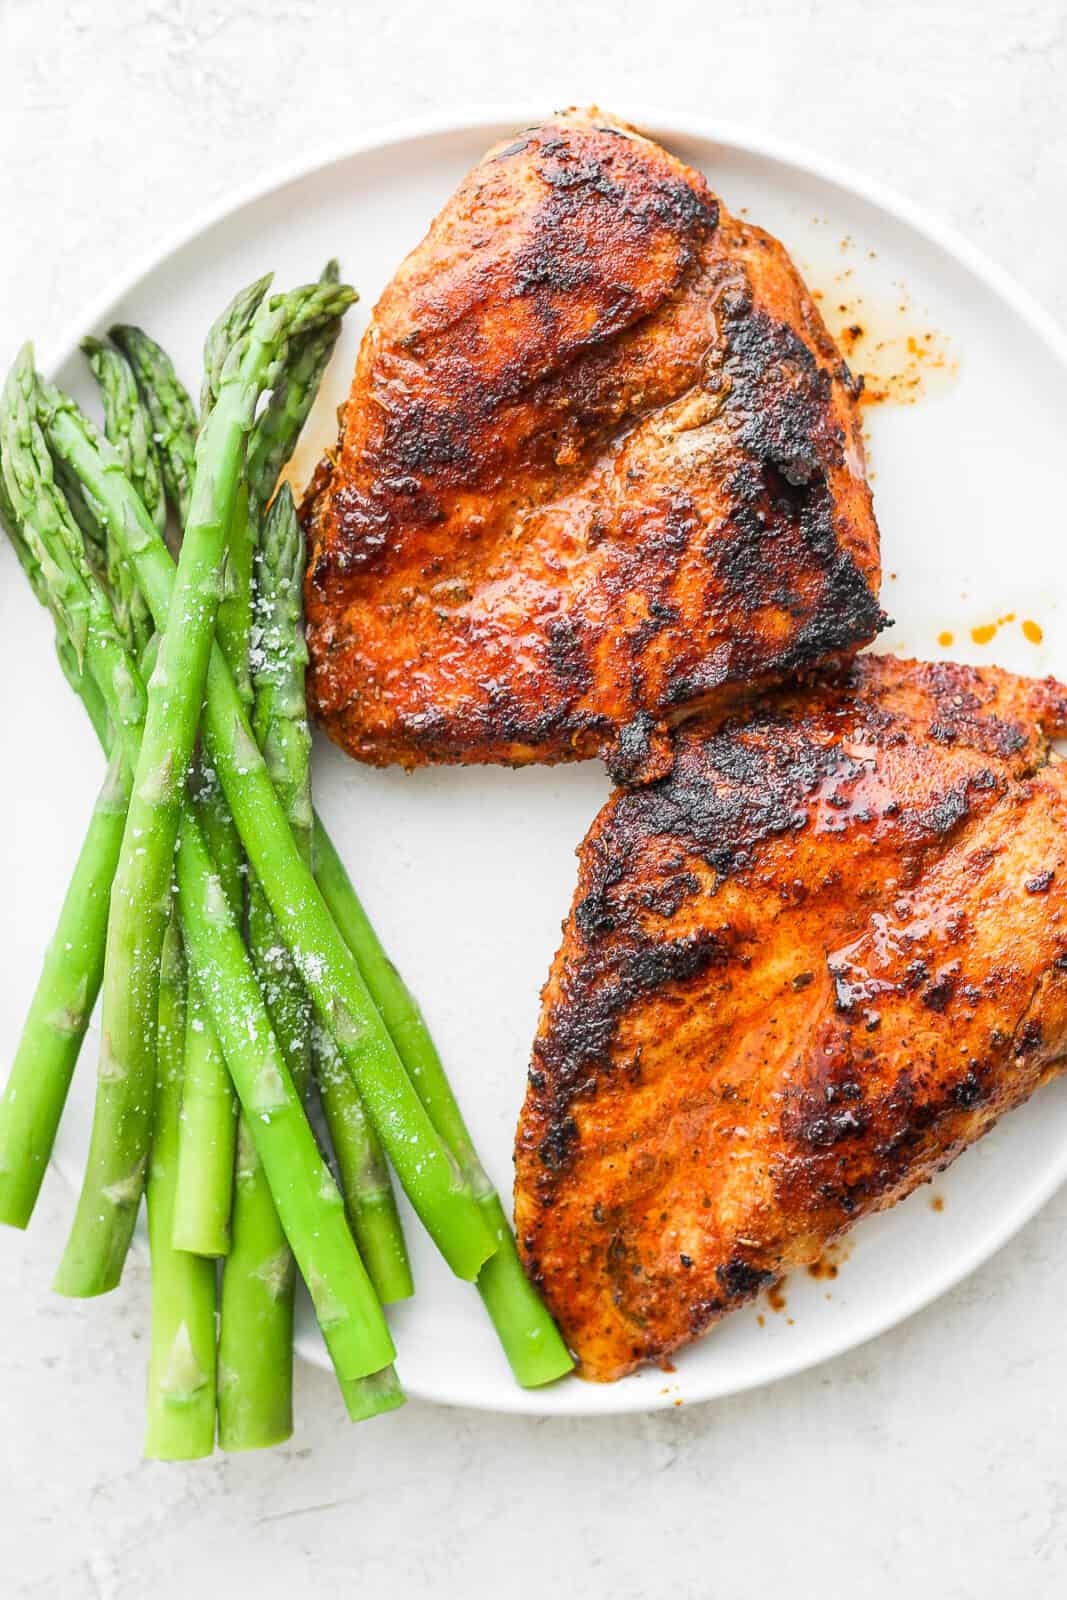 Blackened chicken breasts on a plate with asparagus.